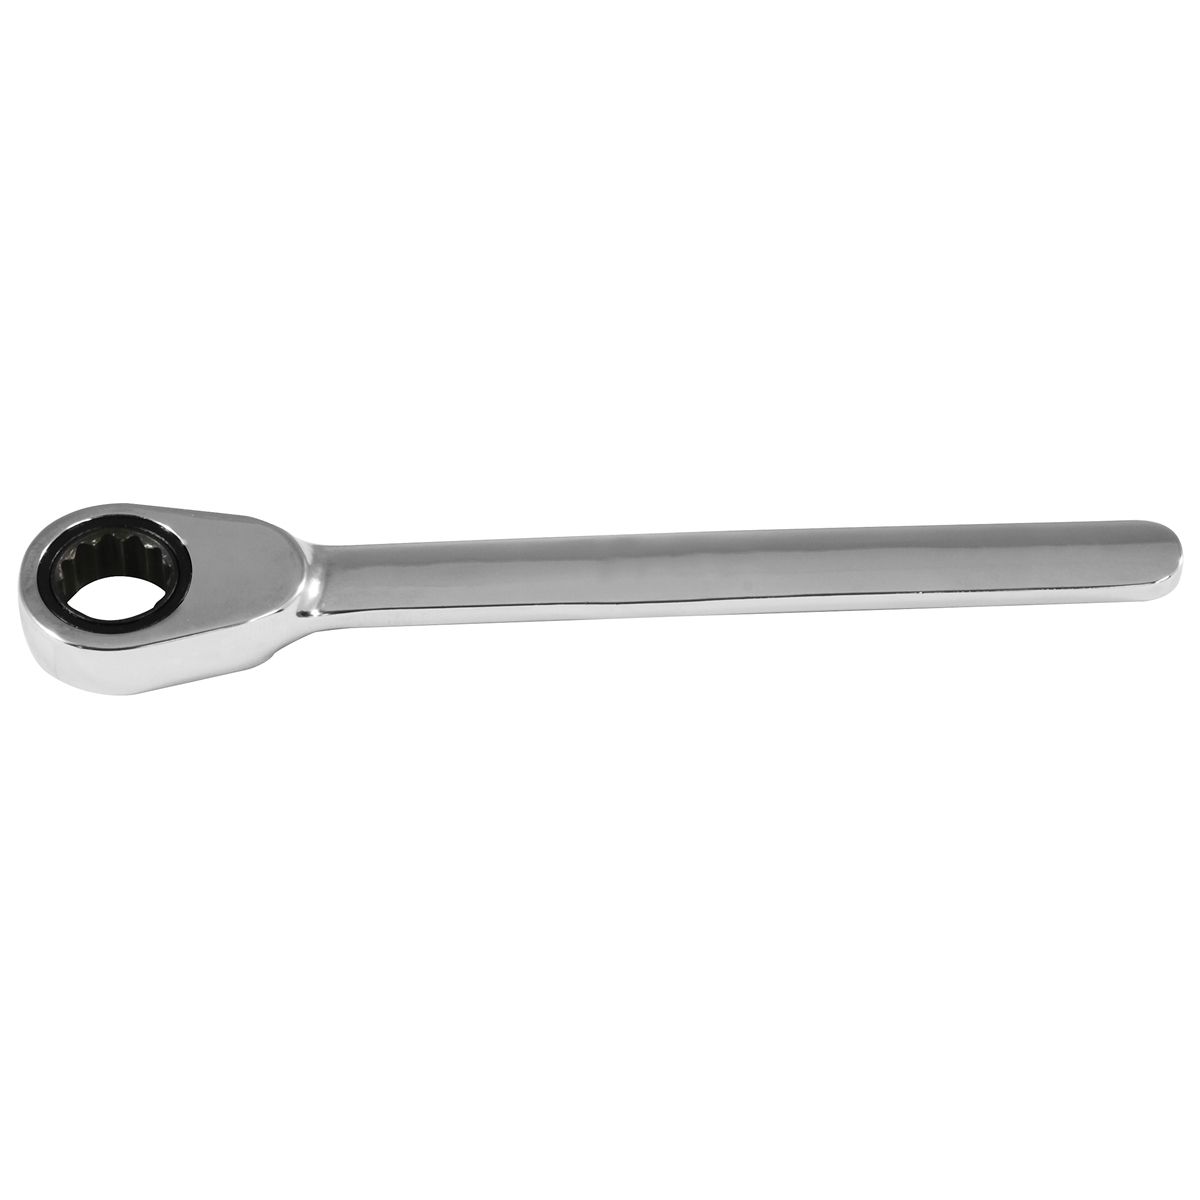 Ratchet S0506 Siegen Ratchet Wrench 1/4" Square Drive Ratchet Wrenches